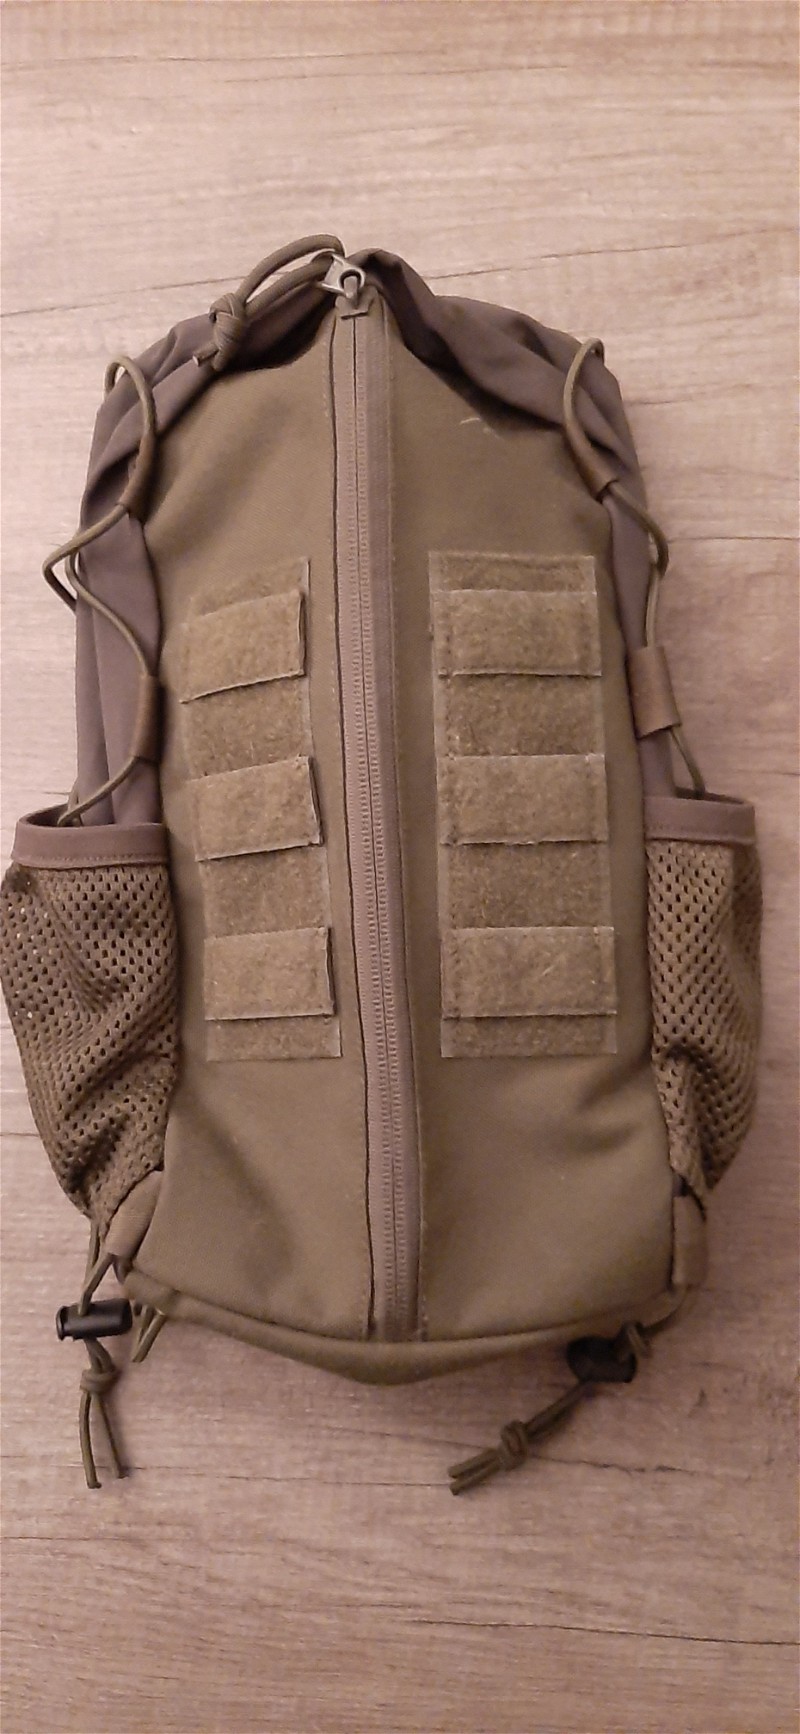 Afbeelding 1 van Hpa fles pouch of camelbag